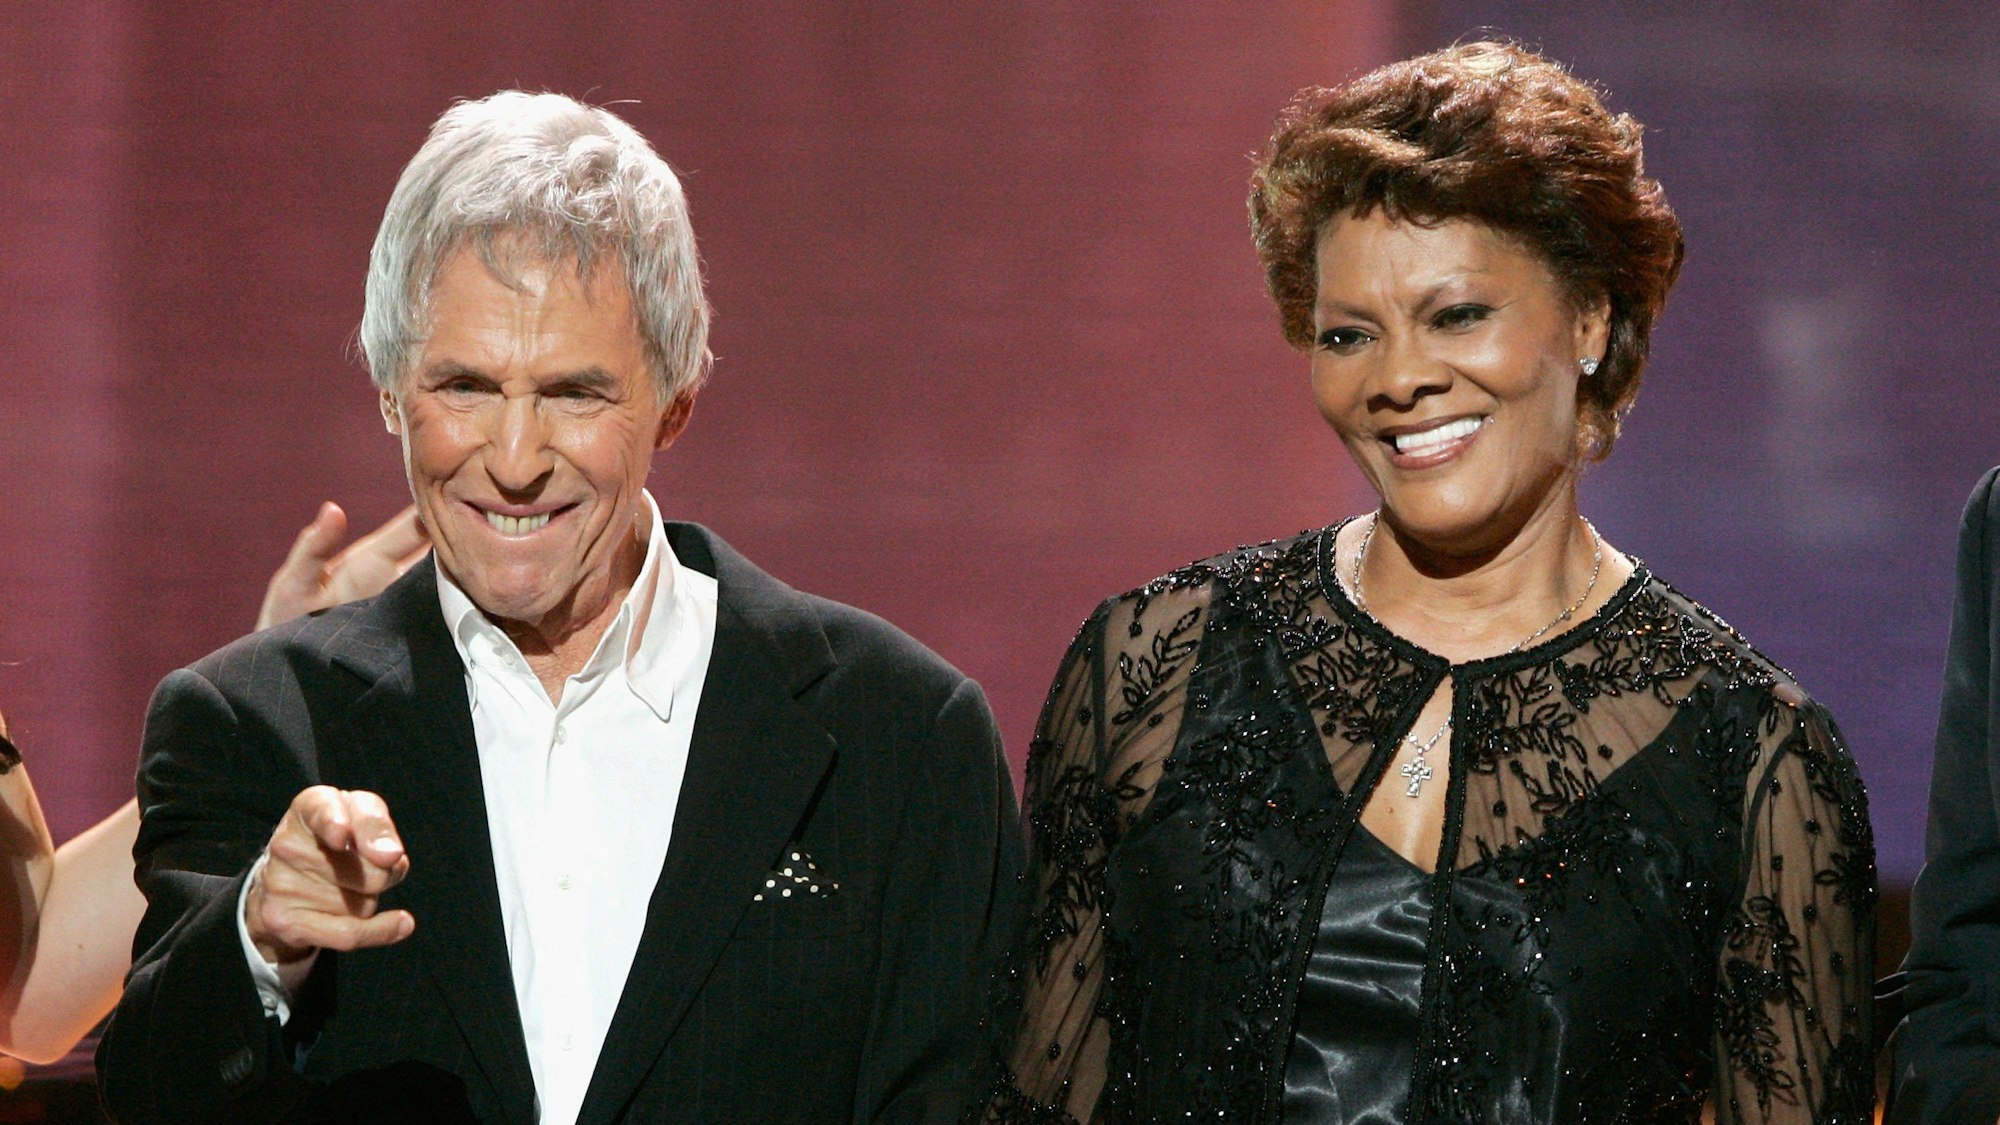 (FILES) In this file photo taken on May 24, 2006 US composer Burt Bacharach and singer Dionne Warwick perform during the American Idol Season 5 Finale  in Hollywood, California. - Legendary pop composer Bacharach, who produced a string of hit songs over decades, has died in Los Angeles at age 94, US media said on February 9, 2023. His publicist said Bacharach, who worked with stars such as Dionne Warwick and wrote hits including "Walk on By" and "Do You Know the Way to San Jose," died of natural causes. (Photo by VINCE BUCCI / GETTY IMAGES NORTH AMERICA / AFP)